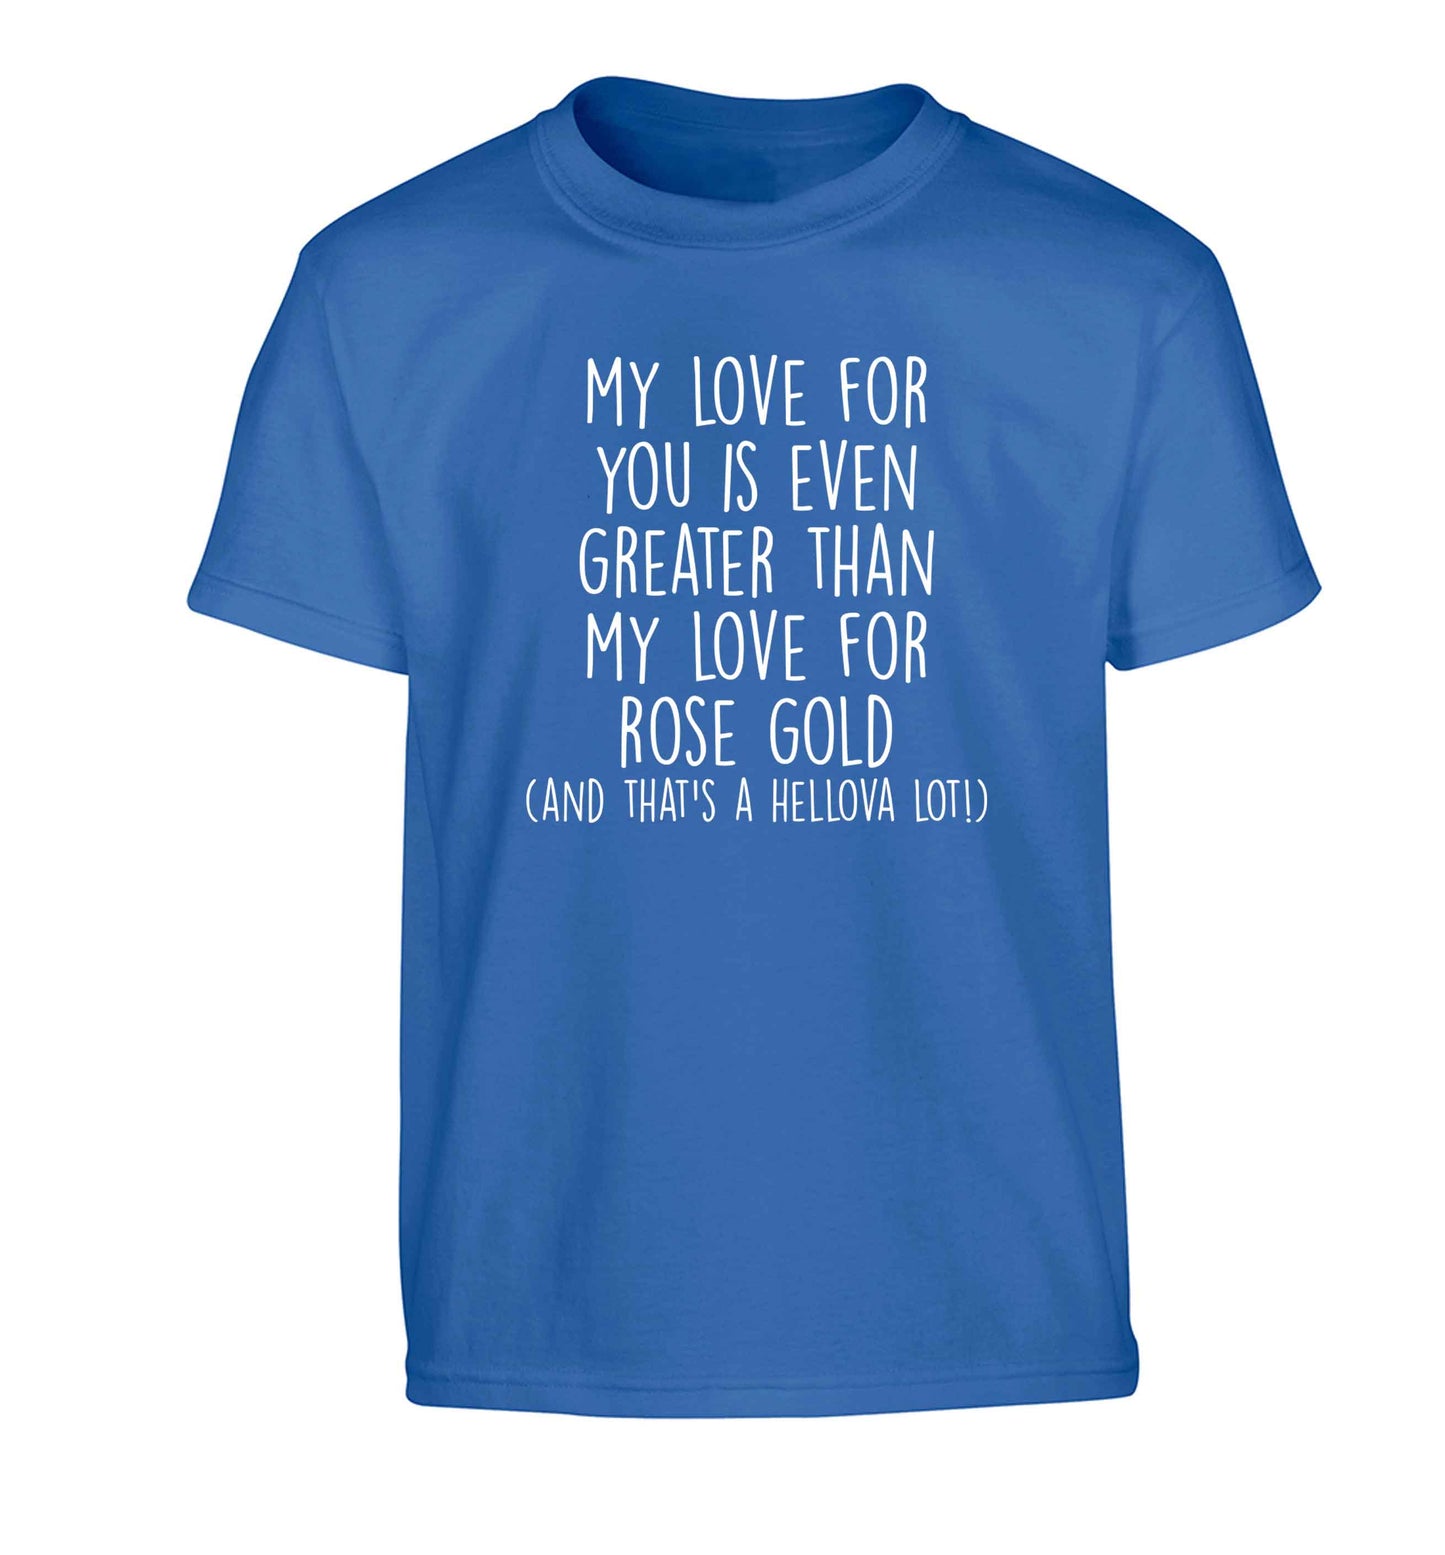 My love for you is even greater than my love for rose gold (and that's a hellova lot) Children's blue Tshirt 12-13 Years